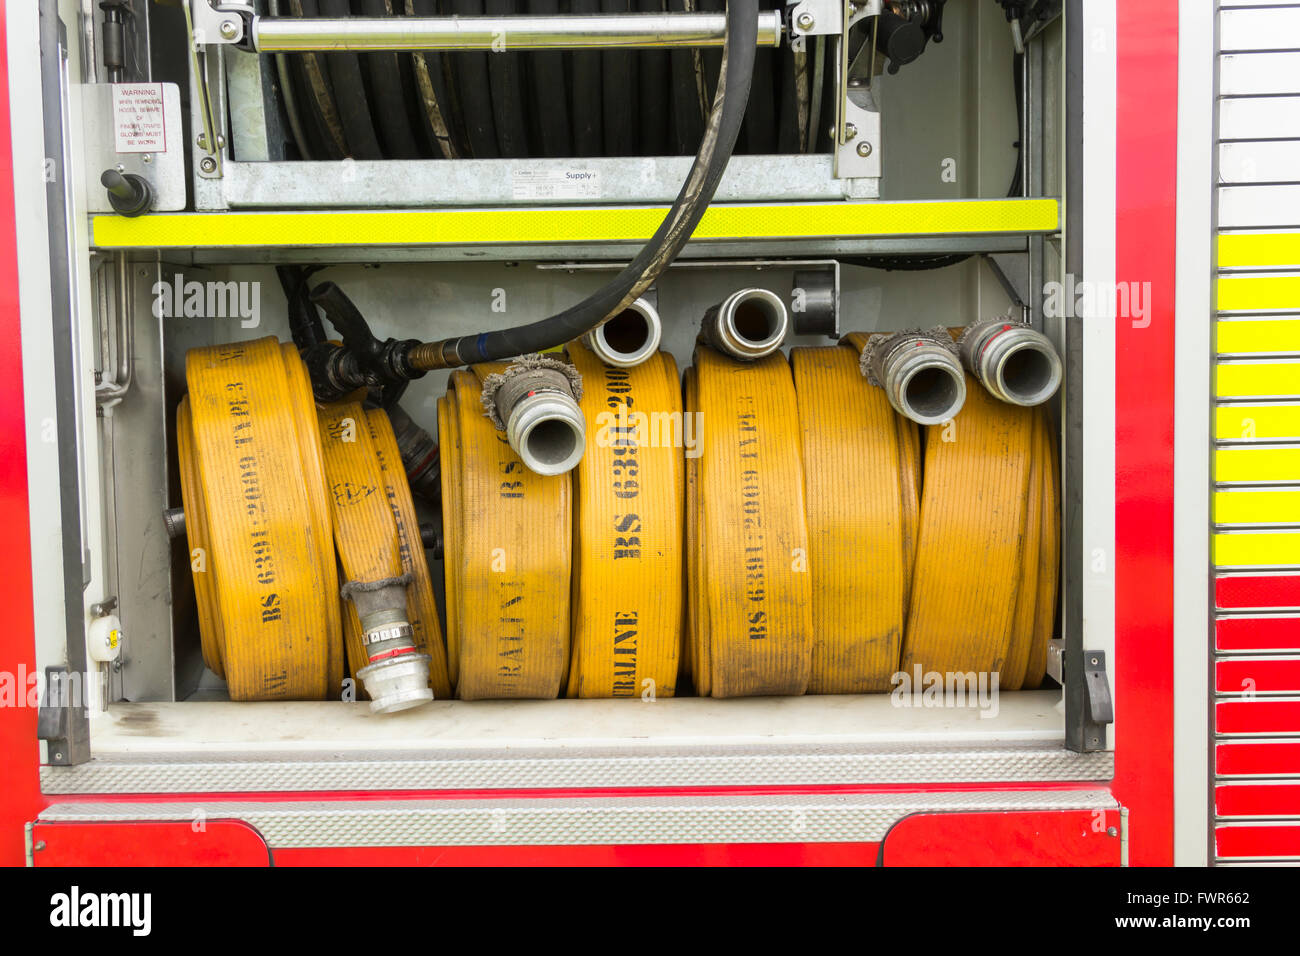 Compartment of rolled fire hoses on a fire engine. The vehicle is a DAF LF series truck with coachwork by Browns of Lisburn. Stock Photo